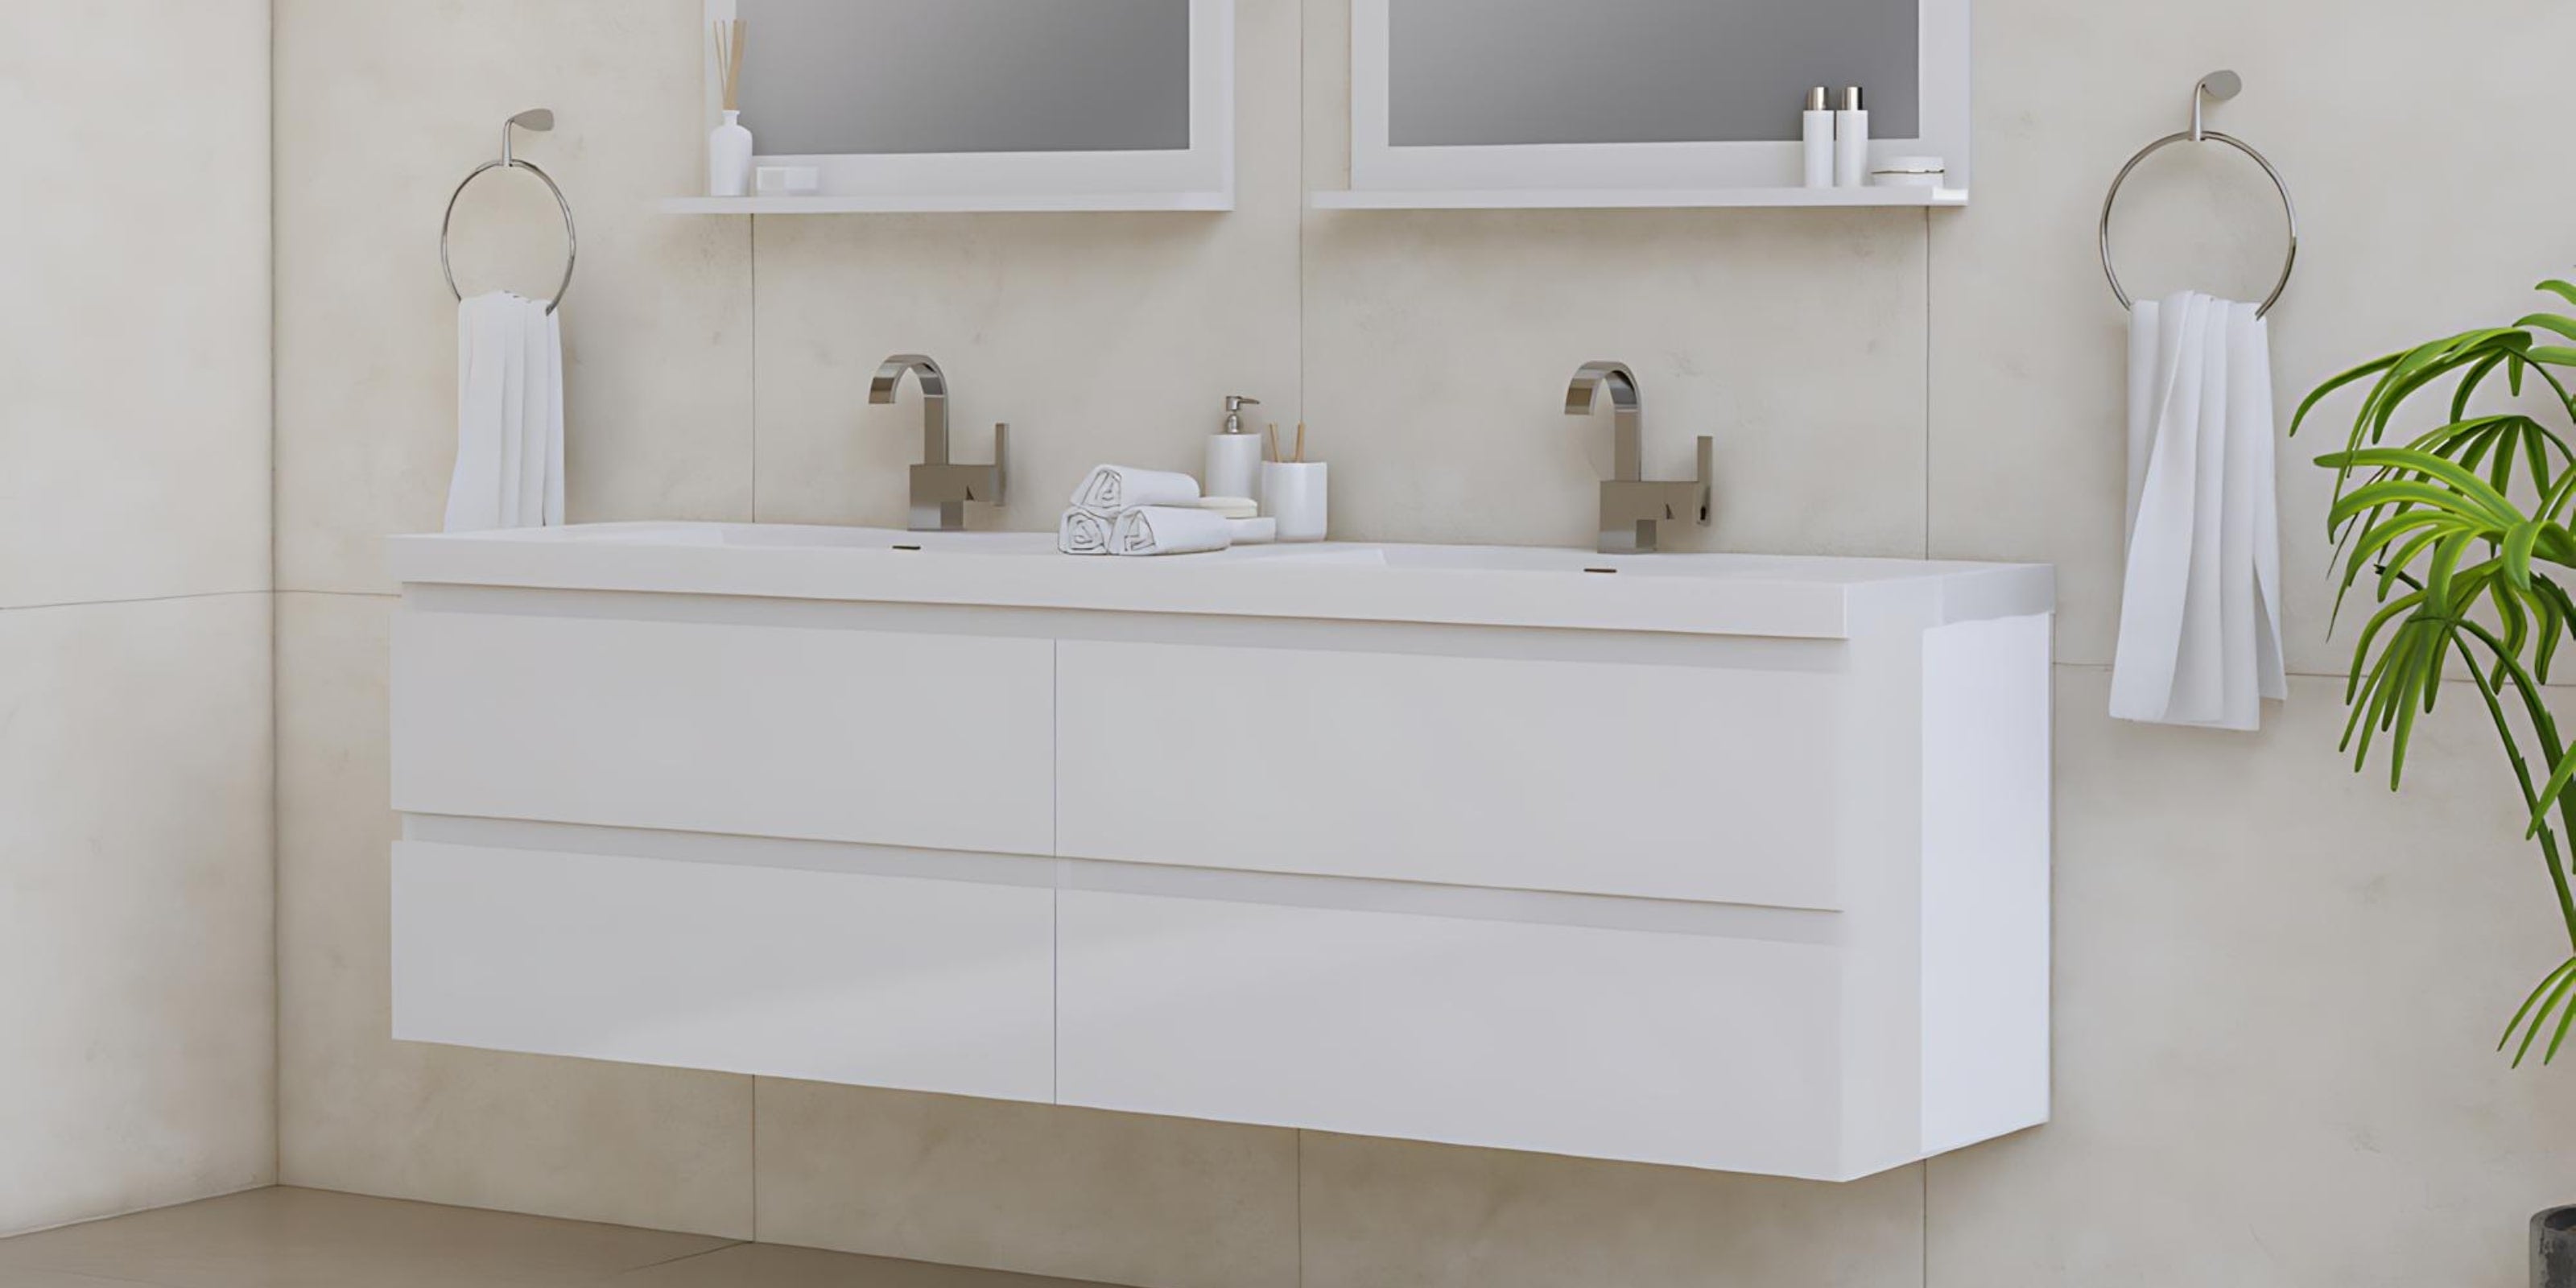 Solid wood floating vanities perfect for your bathroom makeover